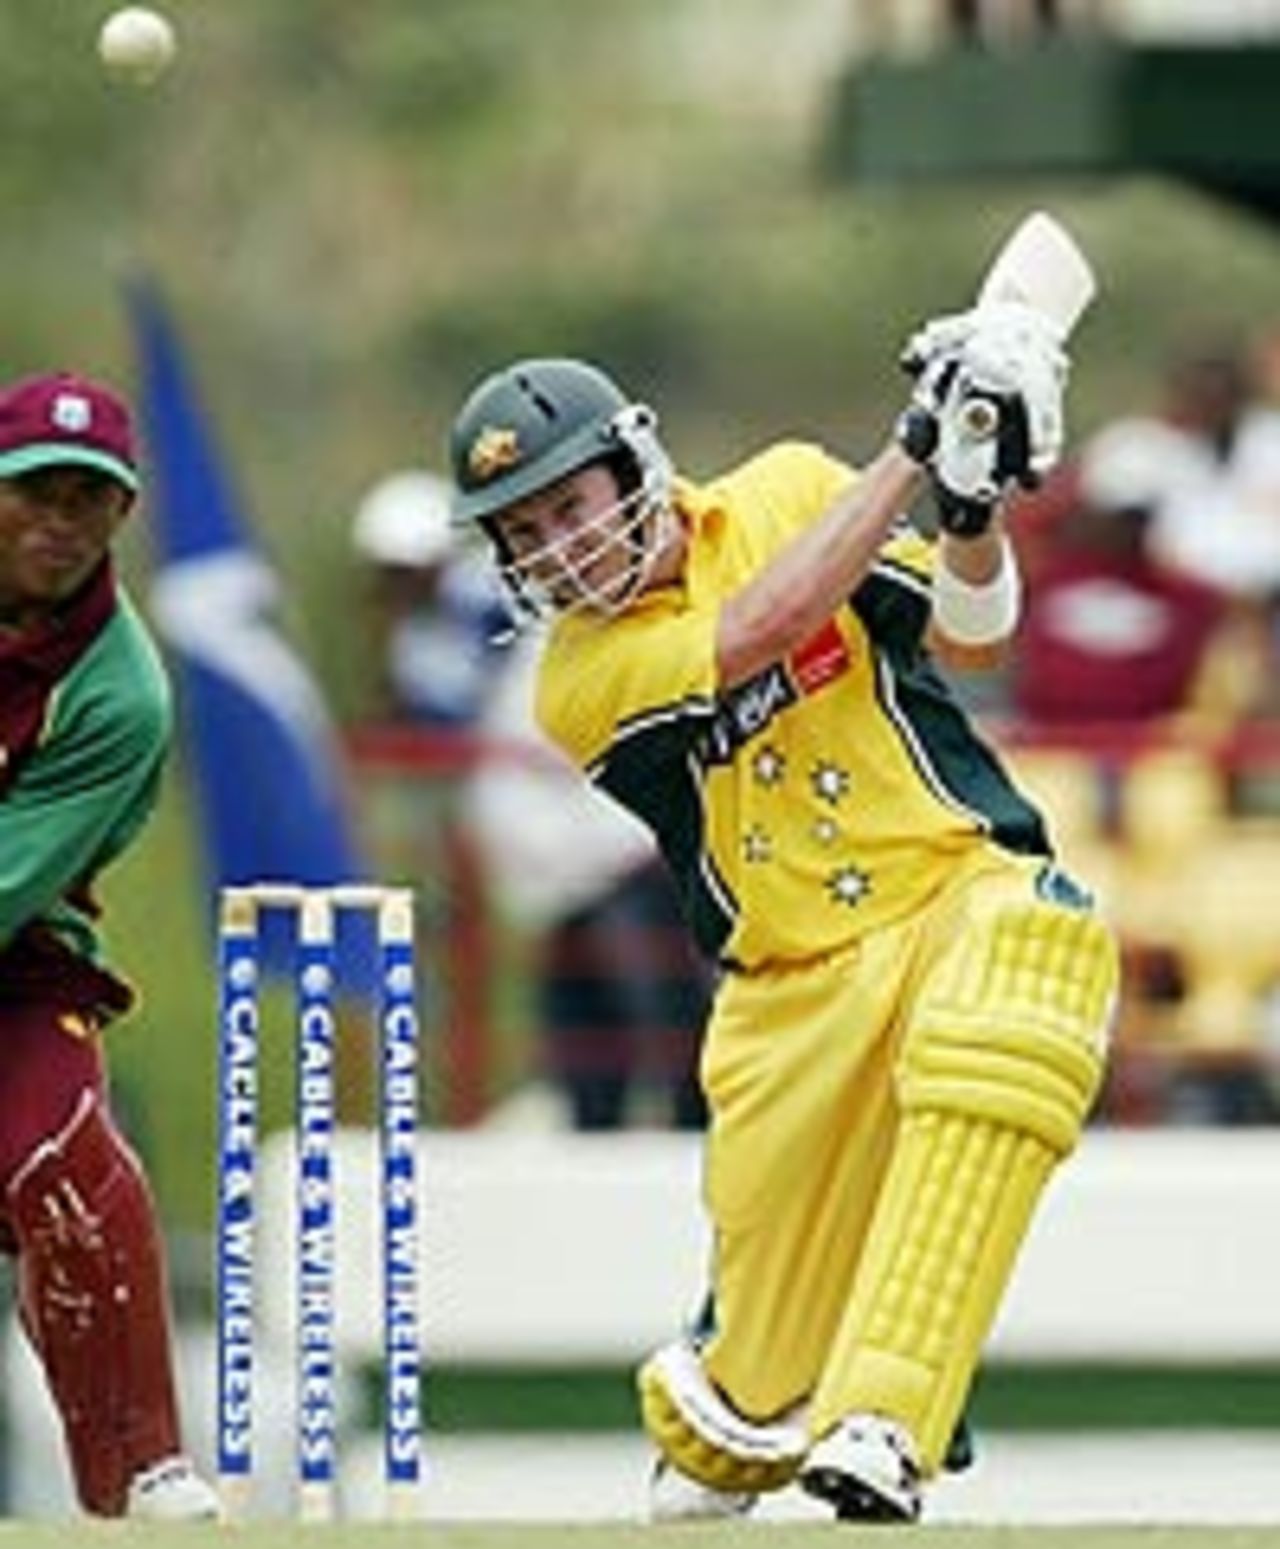 Australia's Michael Clarke lofts for four against West Indies in St Lucia (May 21, 2003)